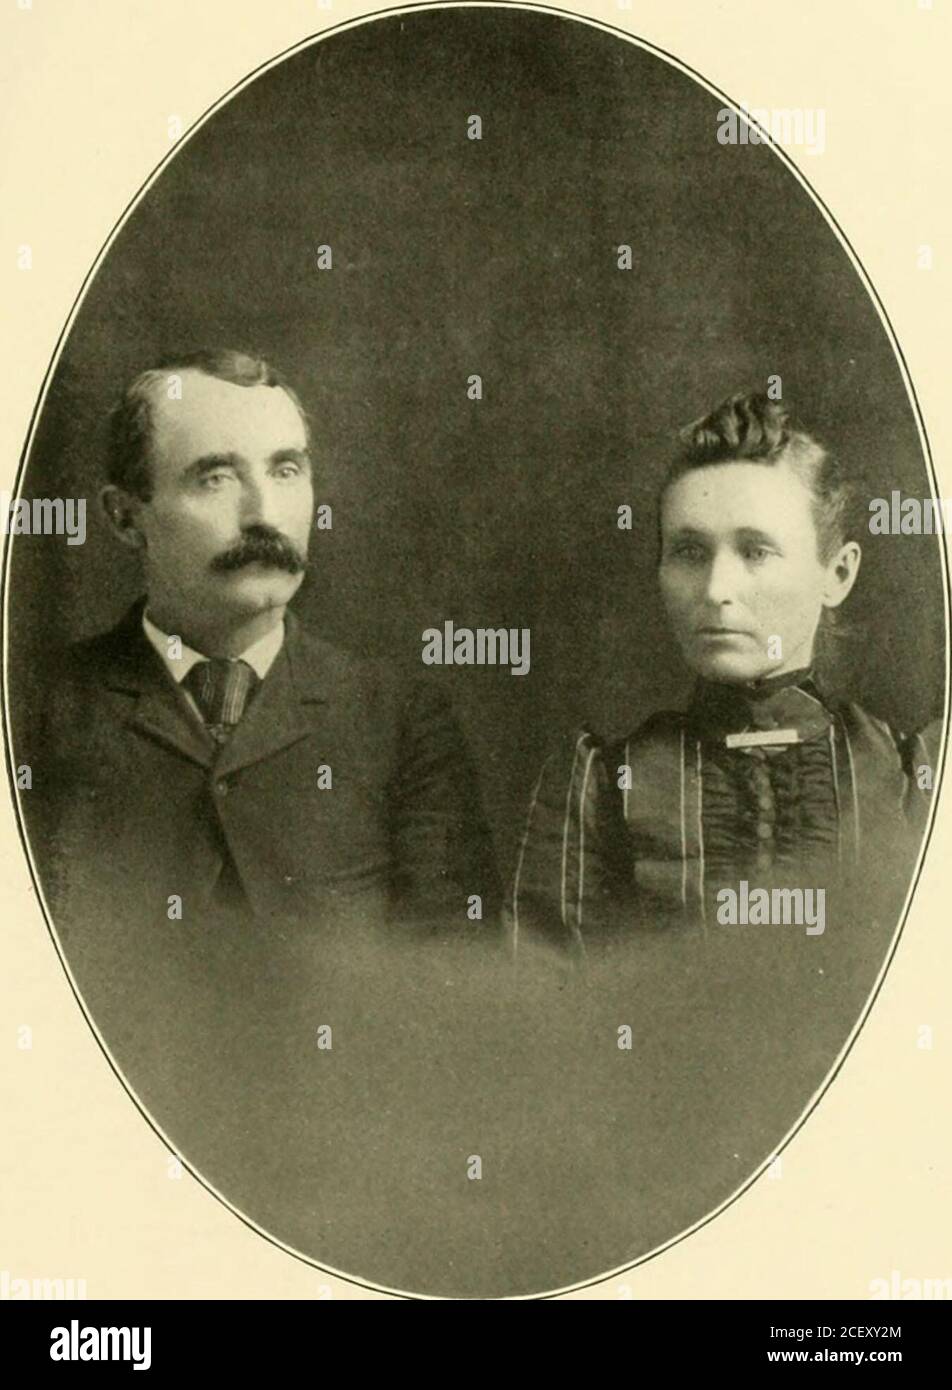 . Past and present of Mahaska County, Iowa : together with biographical sketches of many of its prominent and leading citizens and illustrious dead. order ofbirth in tiie family of ten children: C. A., whomarried Margaret Evans and is living in Prai-rie township: Jacob T.; Jasper N., who weddedMargaret Shelly and resides at Blackwell, Ok-lahoma: Margaret, who become the wife ofAmos Evans, who purchased her fathers oldhomestead in Richland township, upon whichthe wife died a few years ago: J. ., who mar-ried Laura Boyd and is living in Knmvlton,Ringgold county, Iowa: Jonathan, who marriedSadi Stock Photo